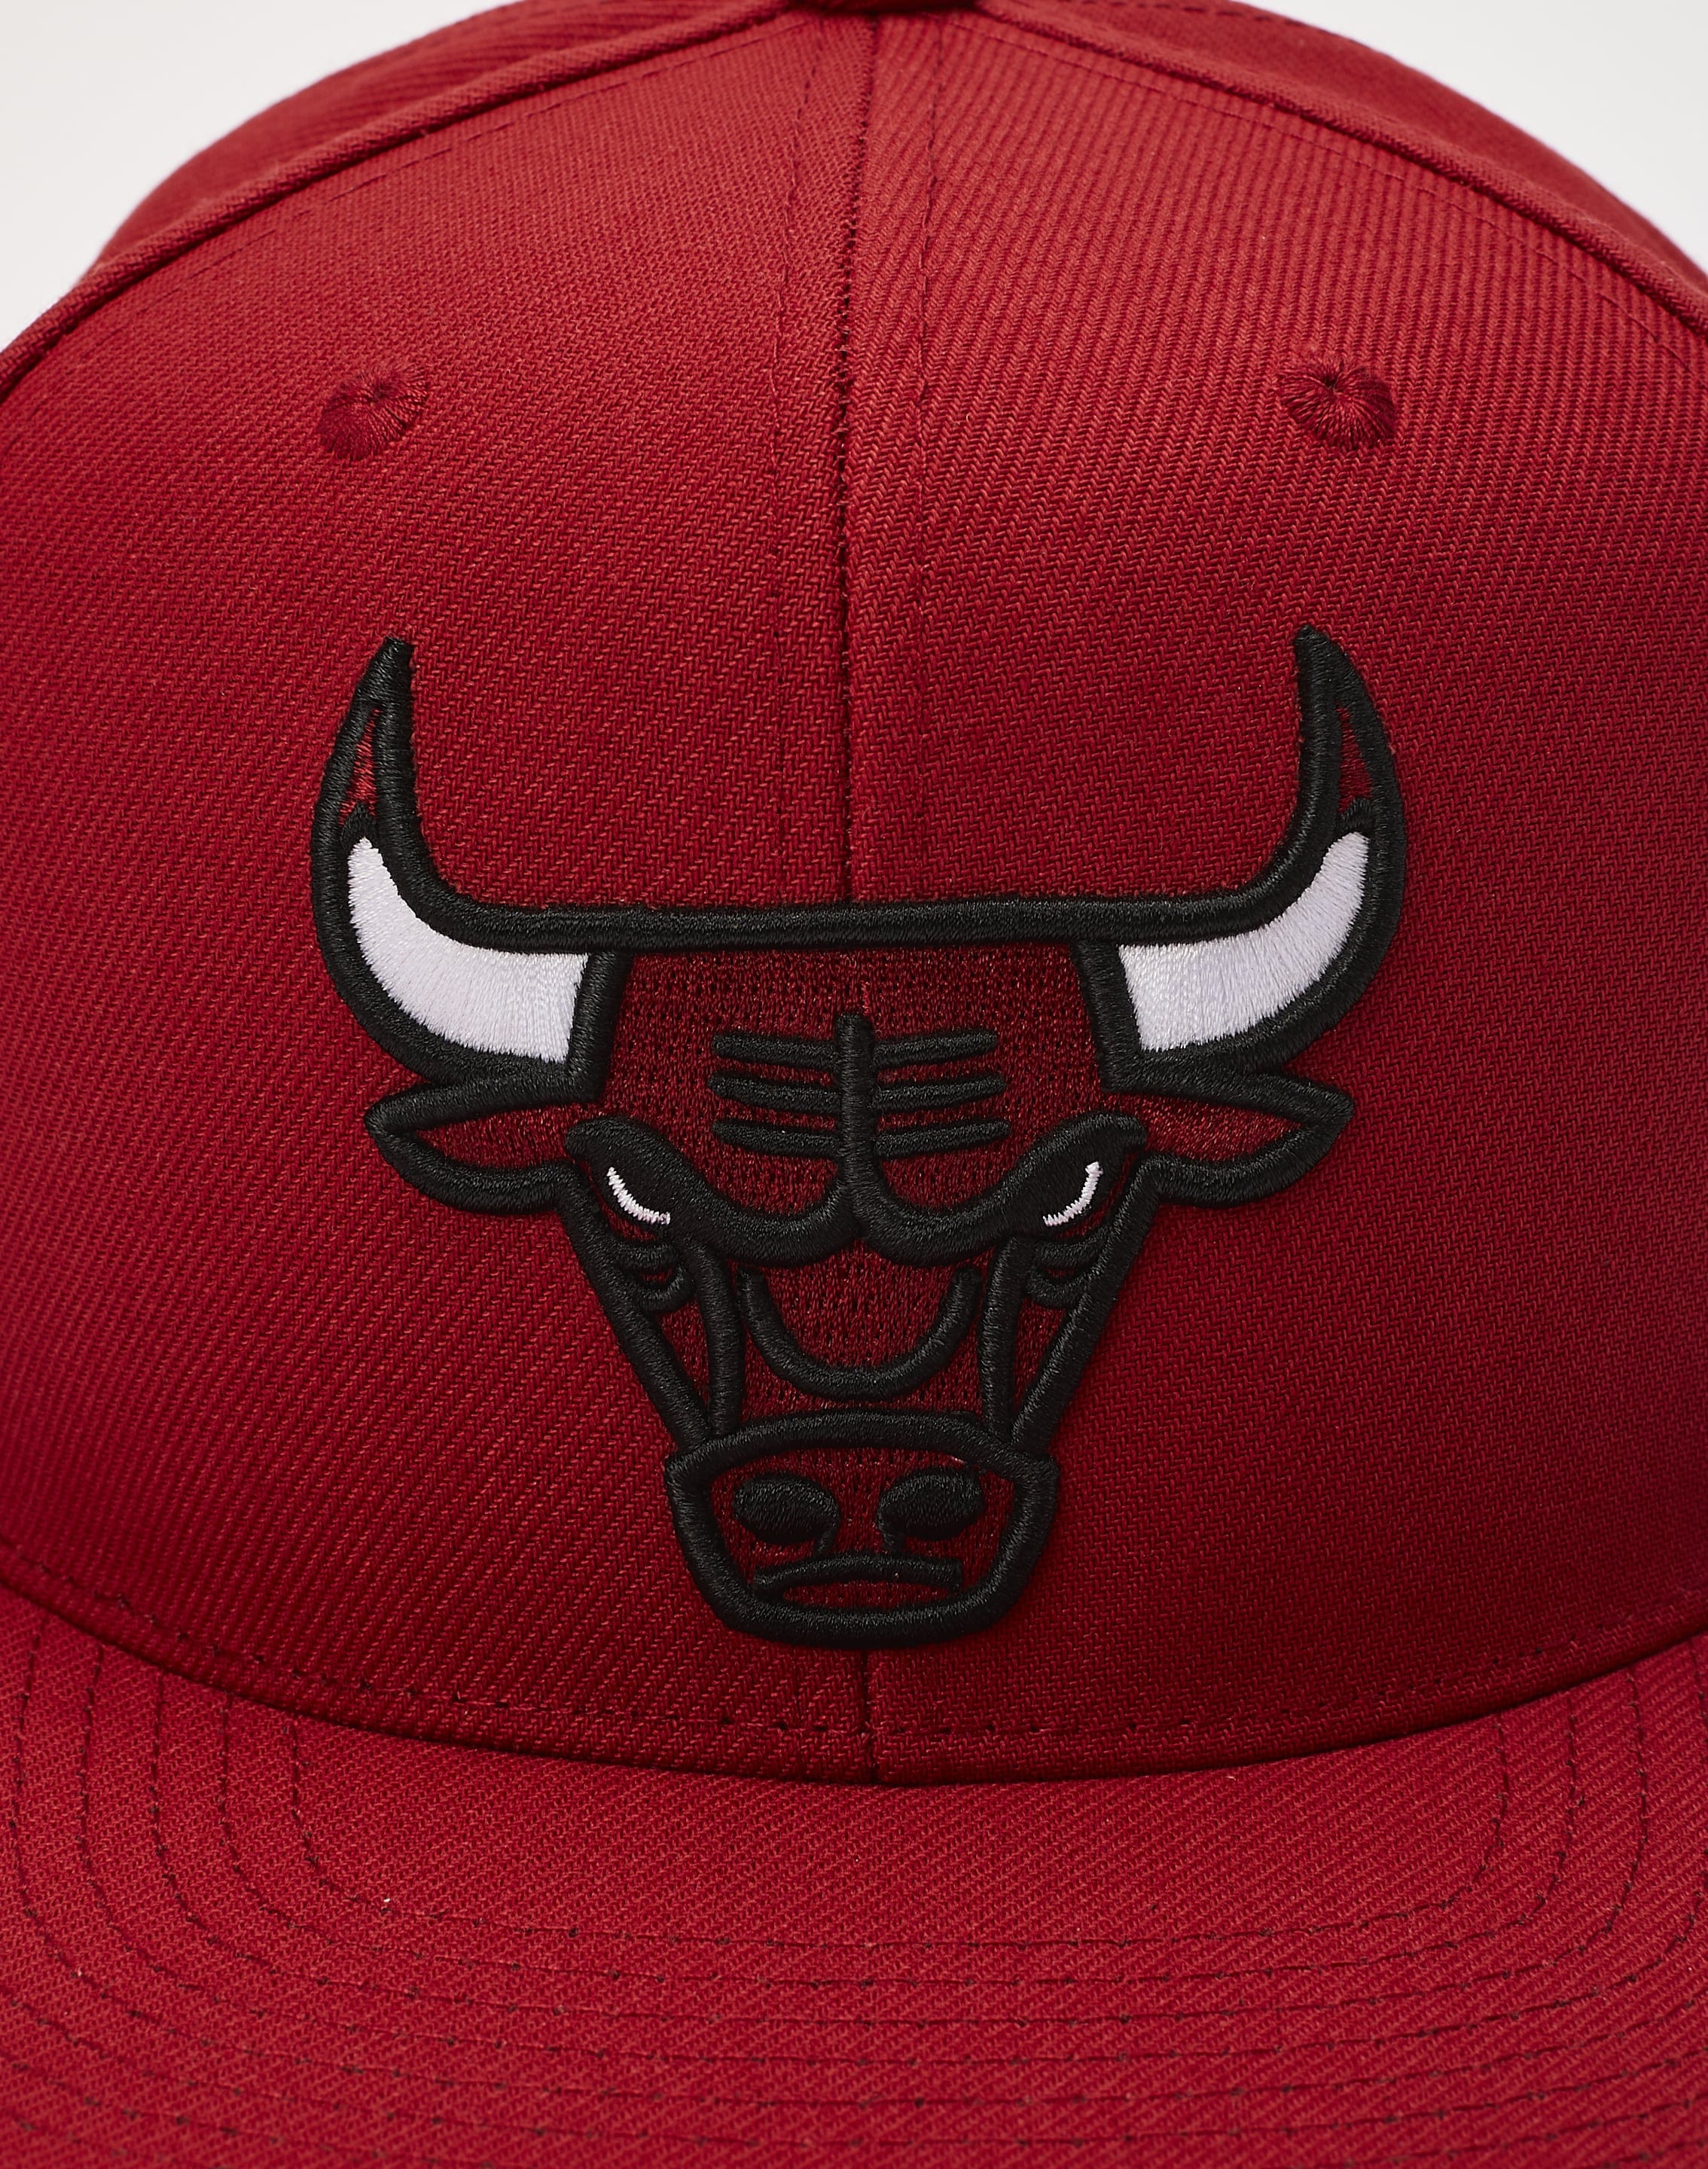 Mitchell & Ness Chicago Bulls Snapback Hat - Black/Red/Script/Satin -  Basketball Cap for Men : Clothing, Shoes & Jewelry 